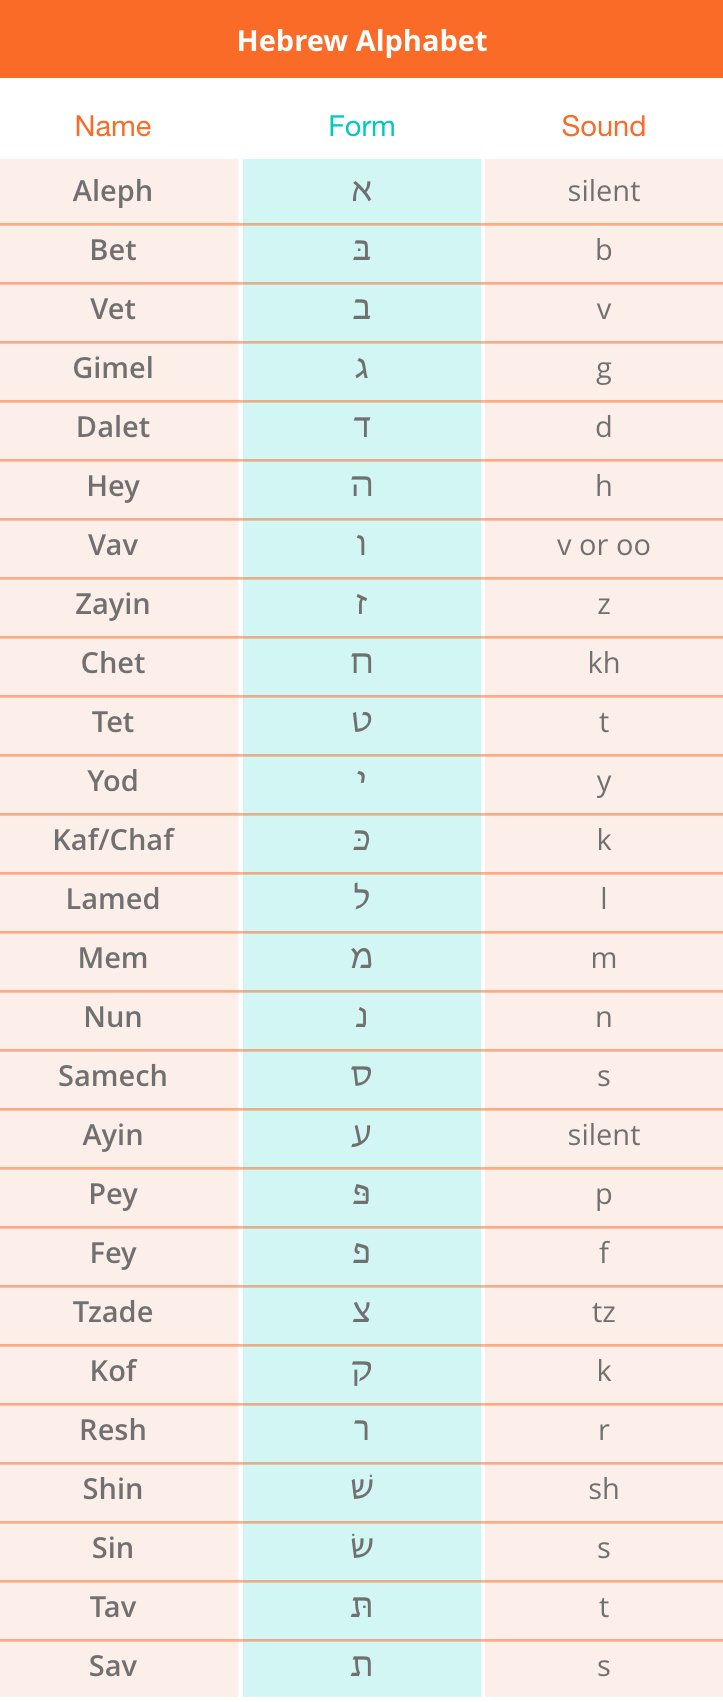 Complete list of the Hebrew letters and their pronunciation